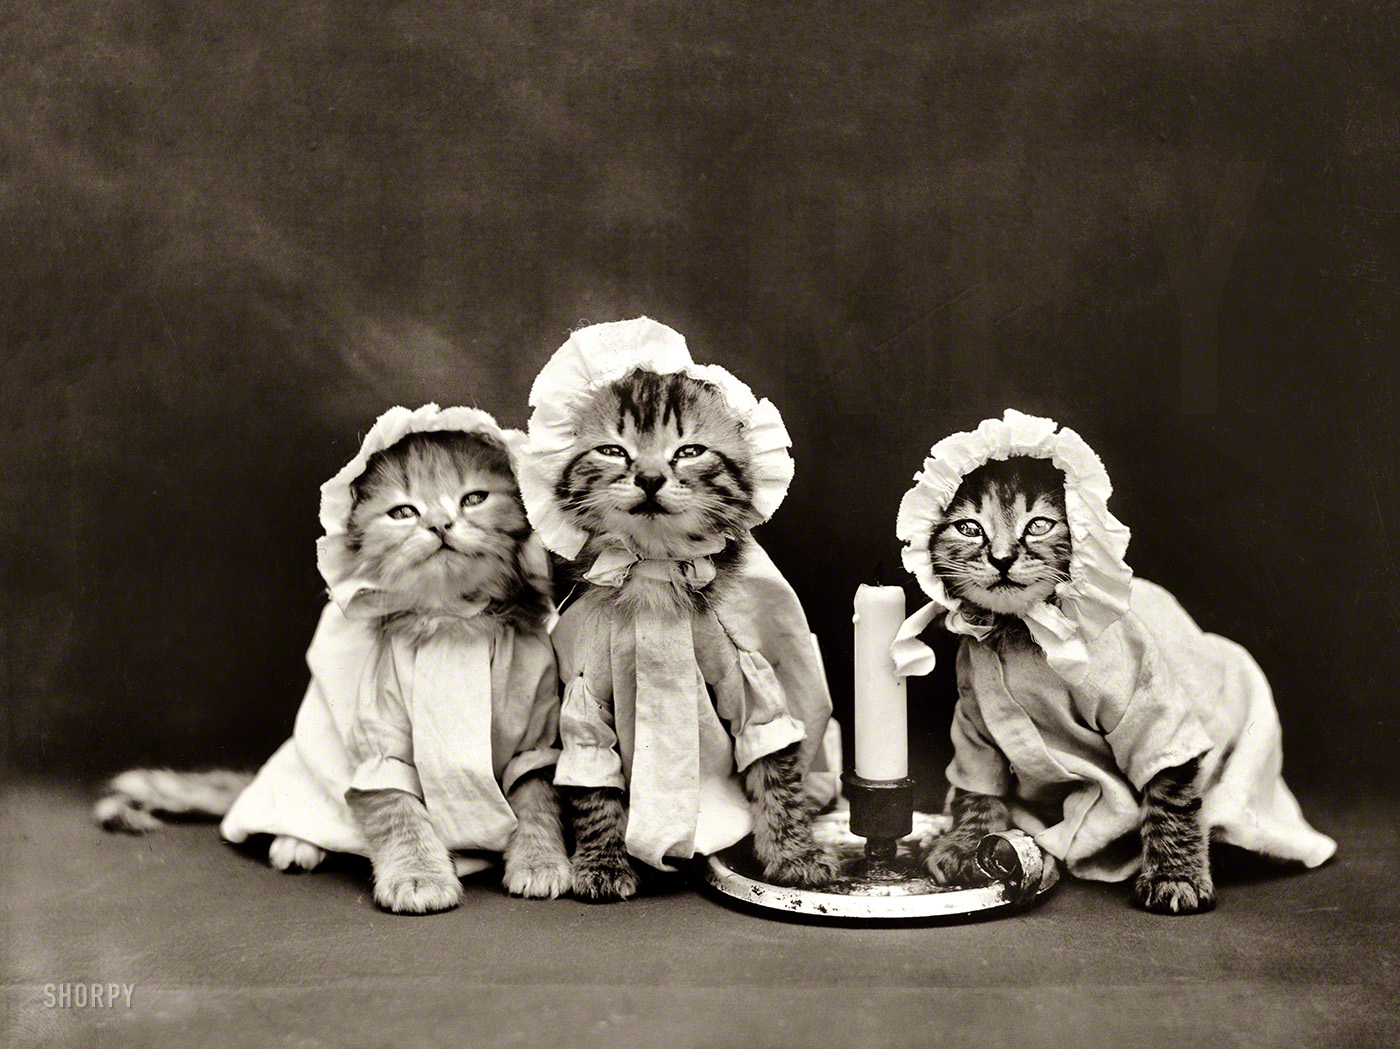 1914. "Three kittens in nightclothes, gathered around candlestick." Just the thing to lull you to sleep. Or keep you awake. Photo by Harry W. Frees. View full size.